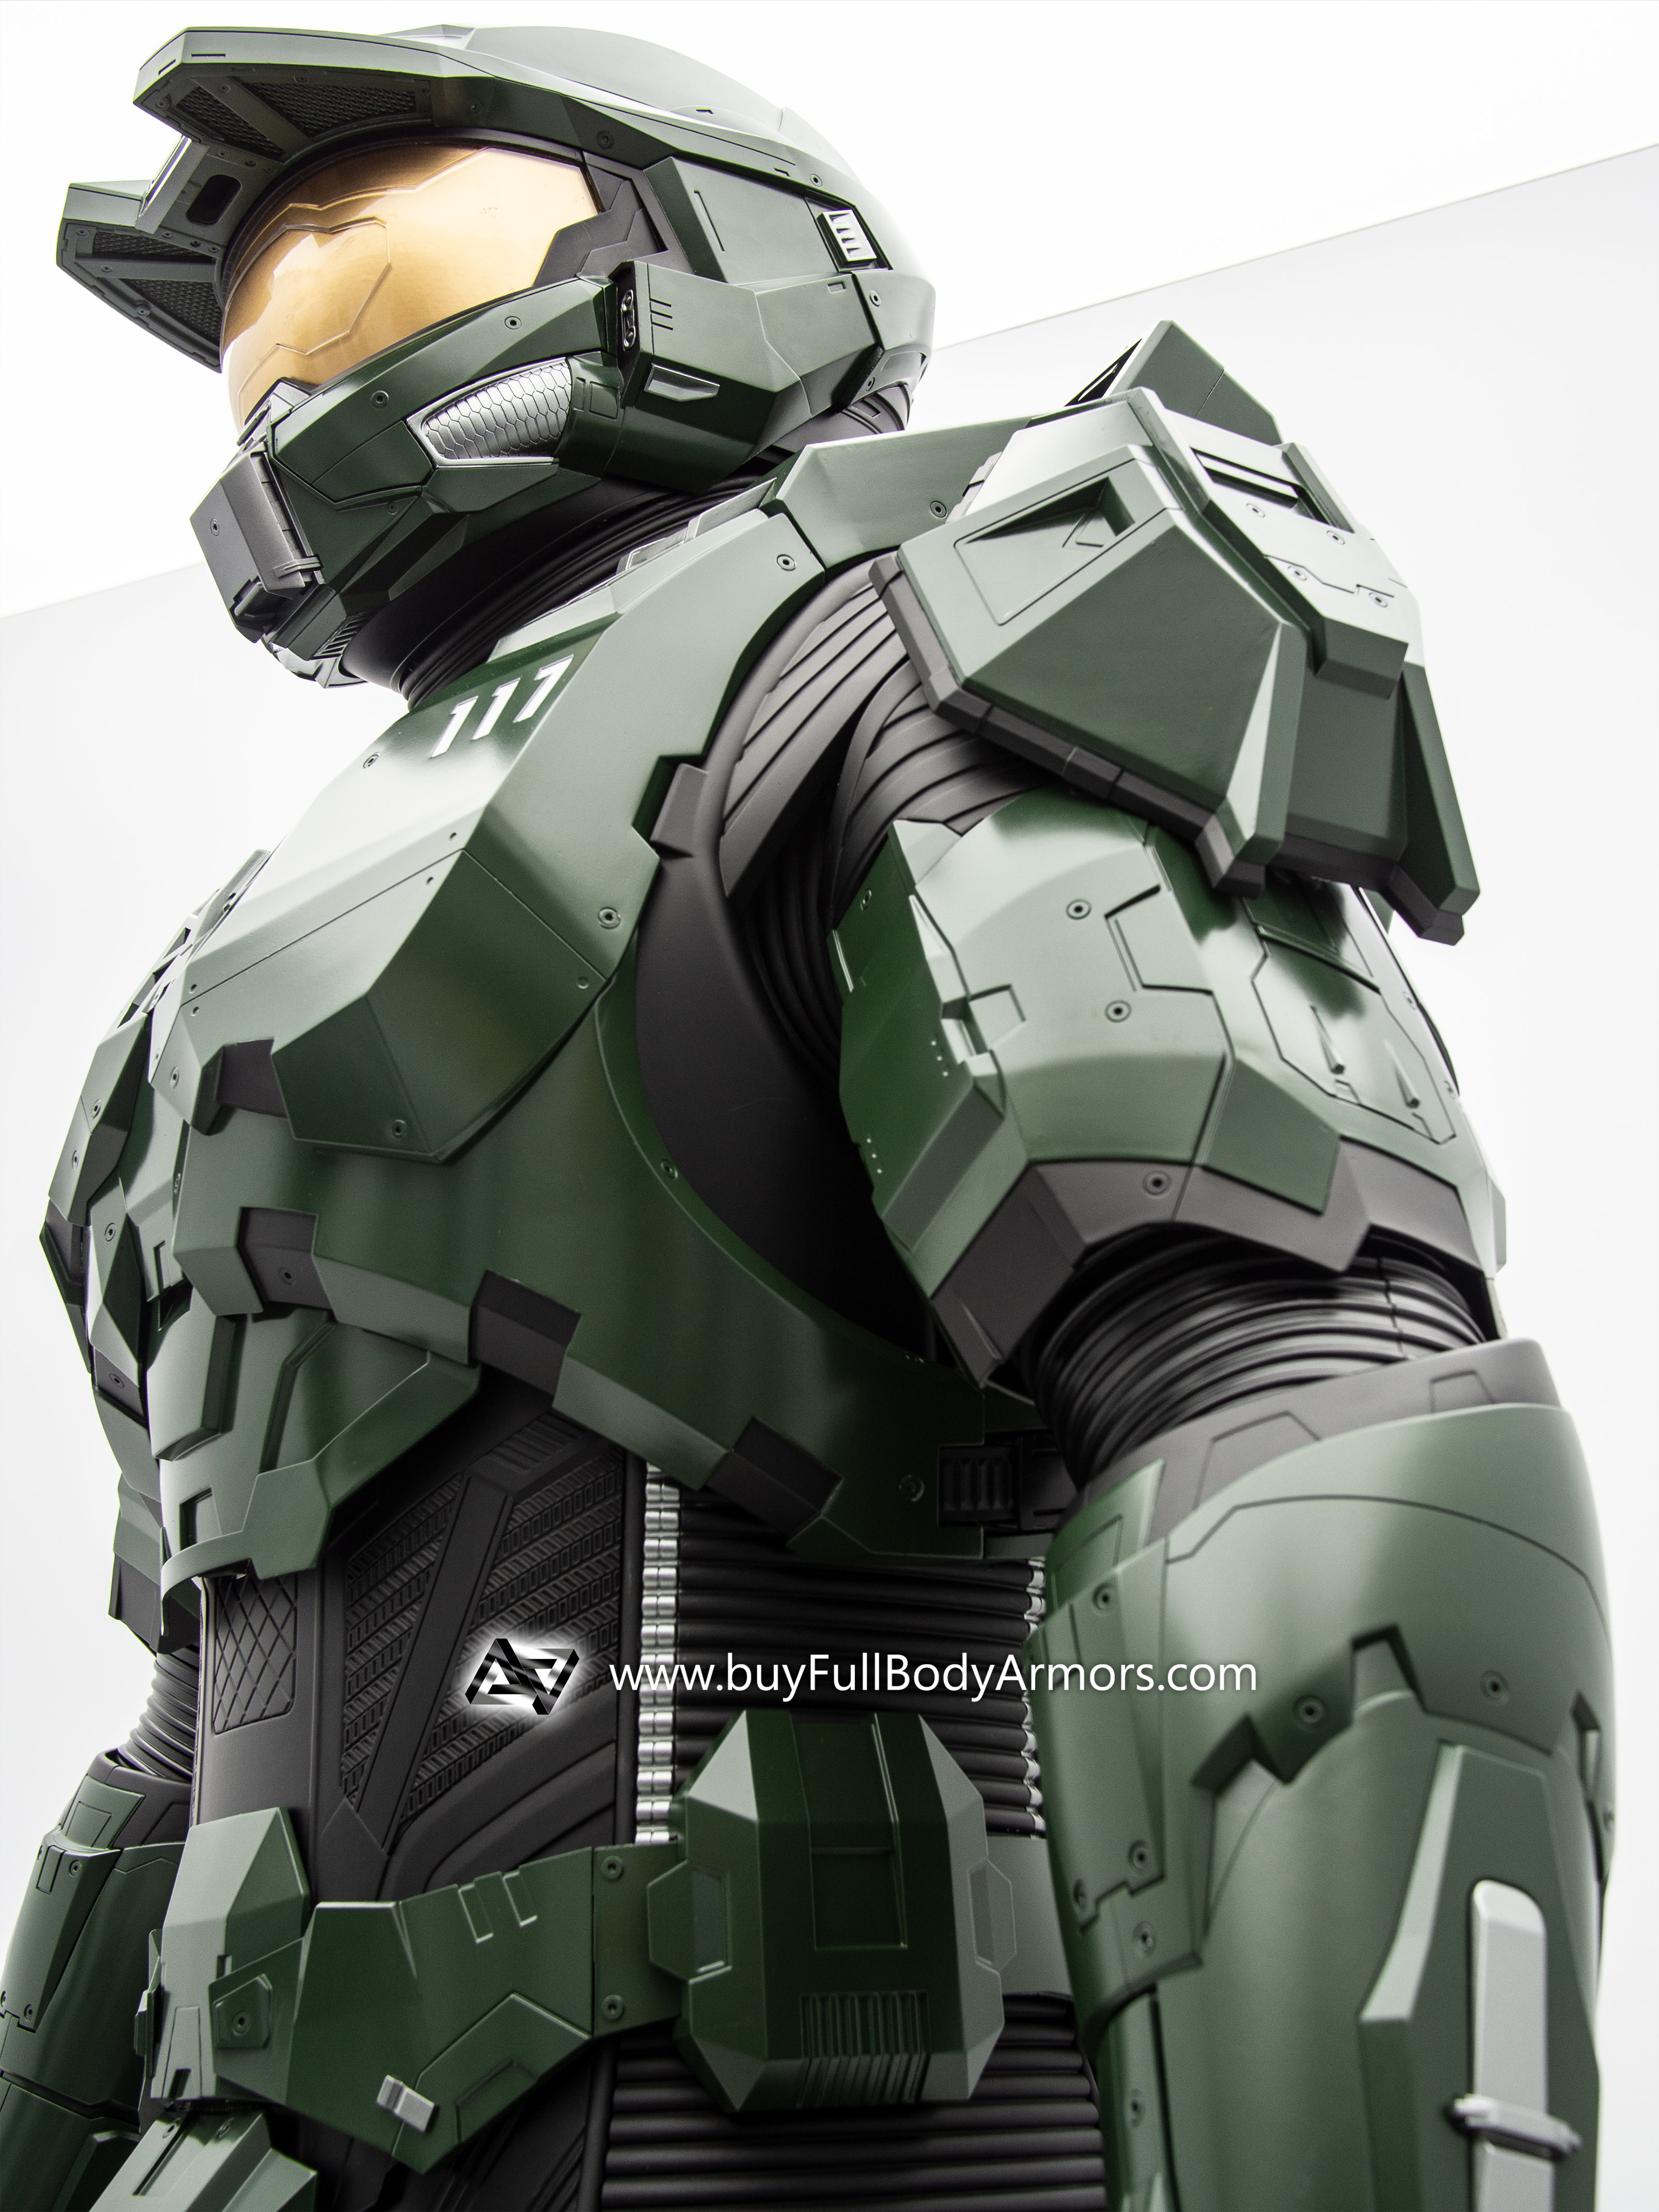 Wearable MASTER CHIEF ARMOR SUIT (Halo Infinity and Halo TV Series Season 2 Version) cover2